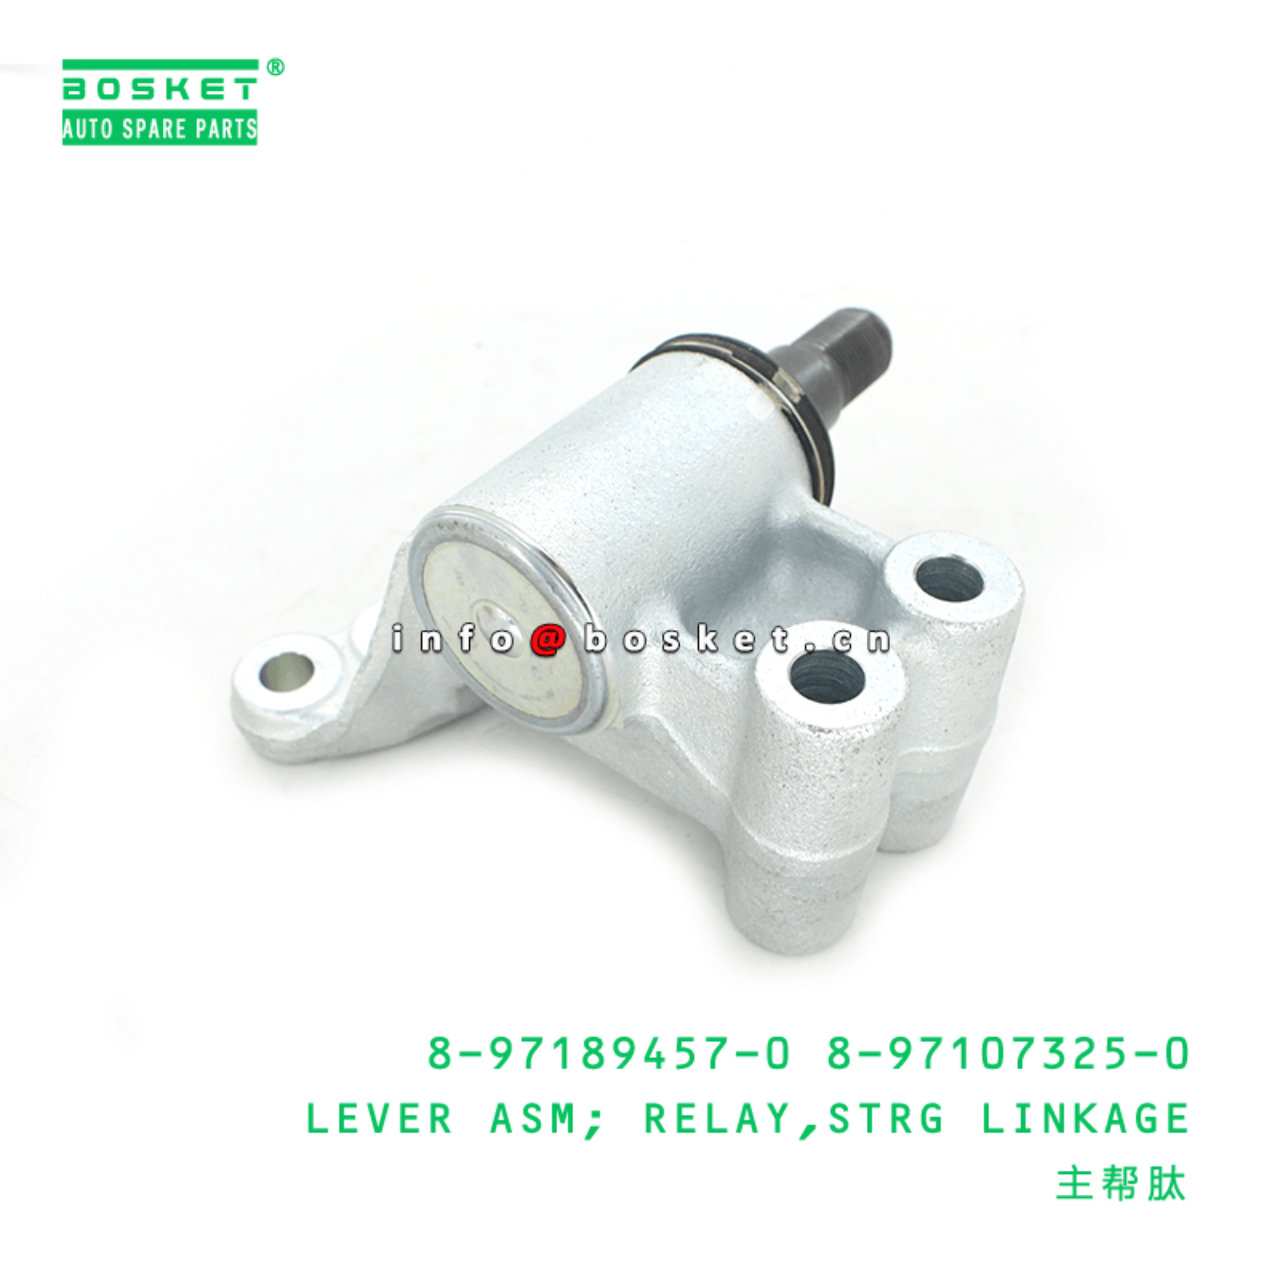 8-97189457-0 8-97107325-0 Steering Linkage Relay Lever Assembly 8971894570 8971073250 Suitable for I